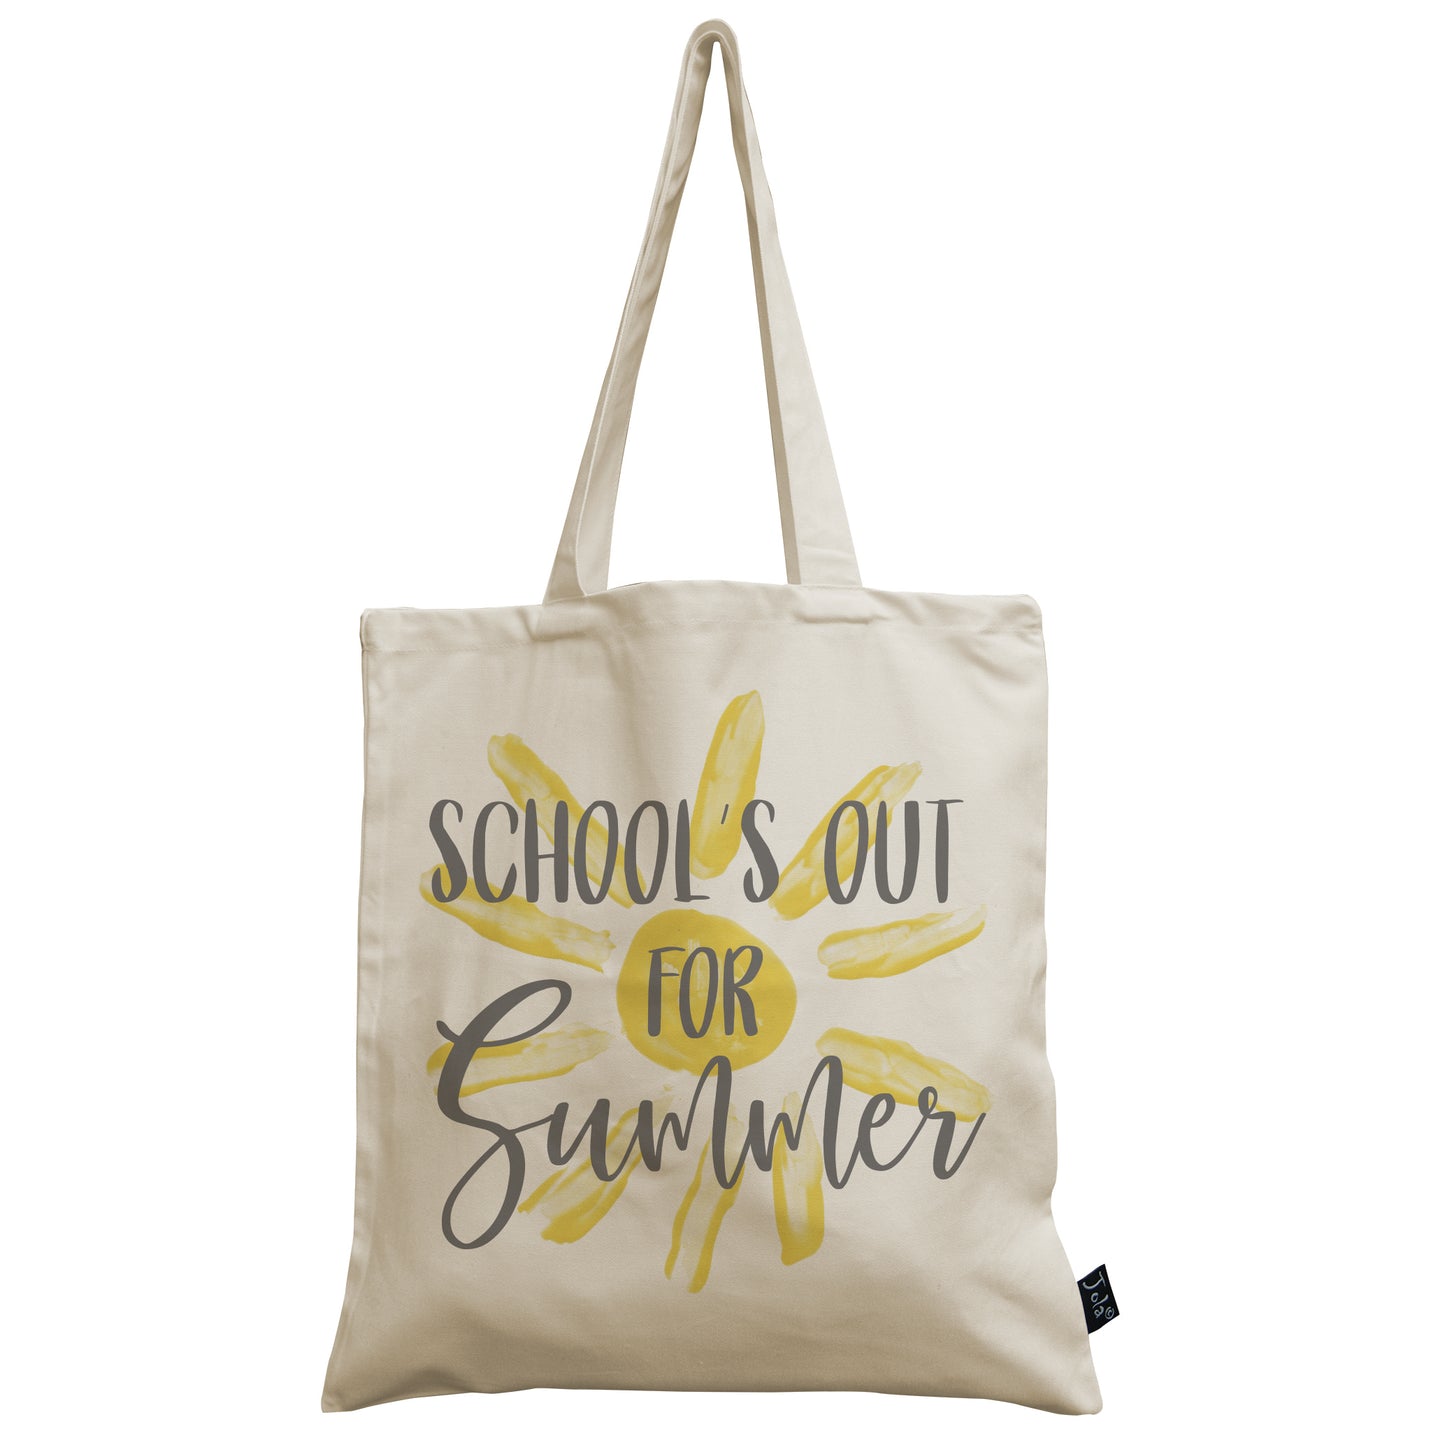 Schools out for summer canvas bag